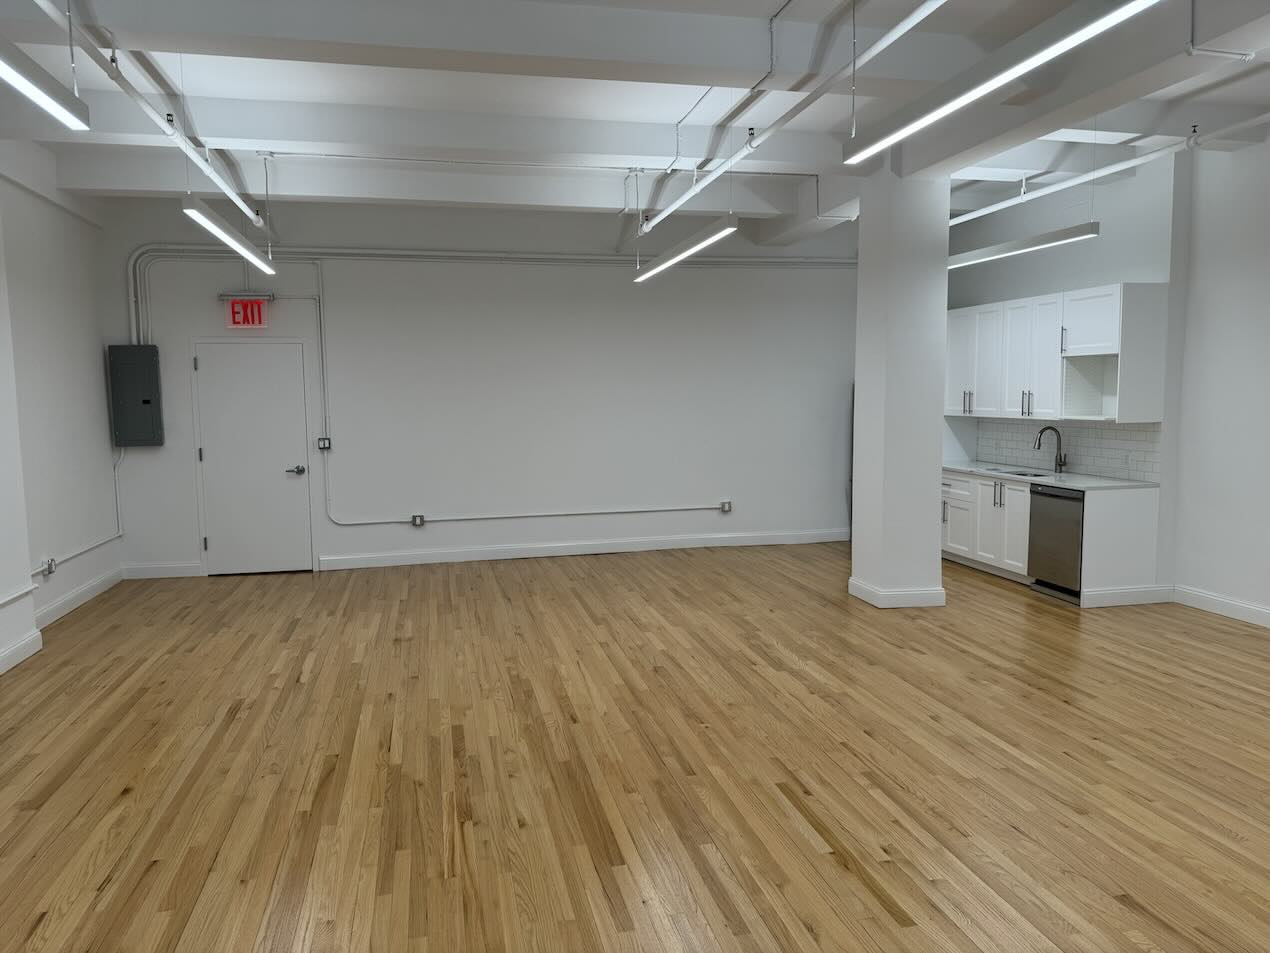 37 West 20th Street Loft Office Space - Entrance and Kitchen